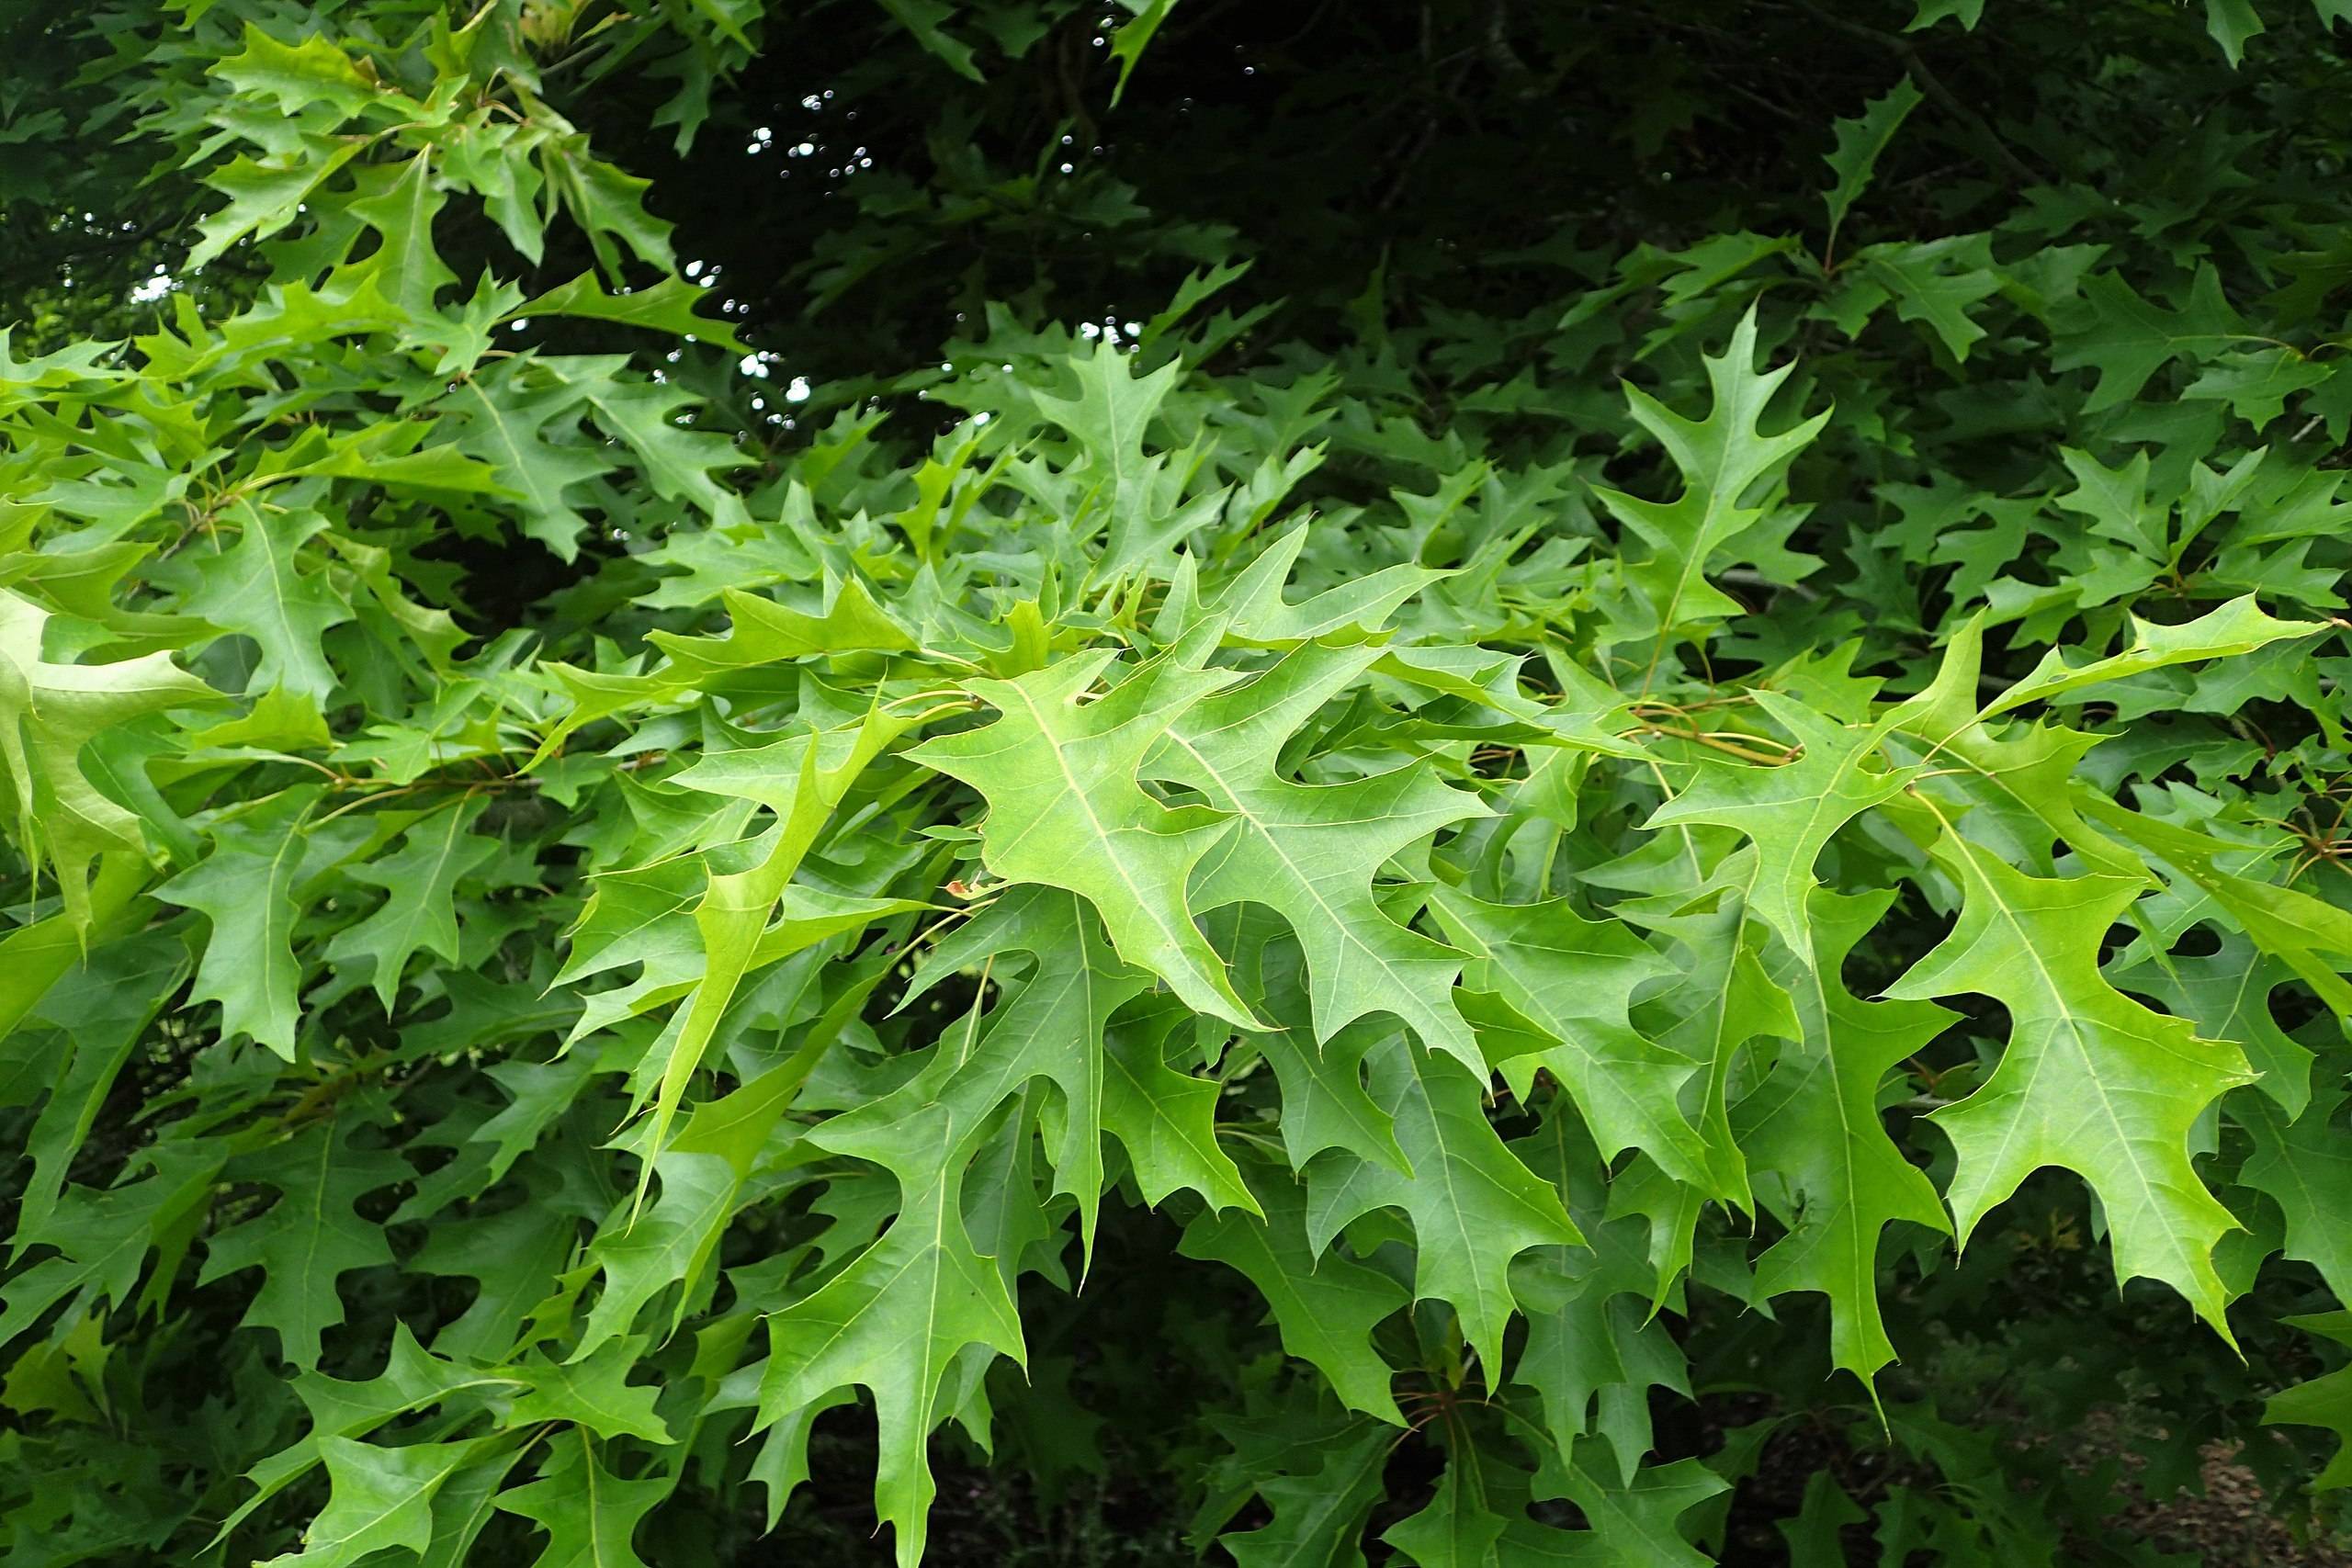 lime-green foliage with yellow veins and light-brown stems
